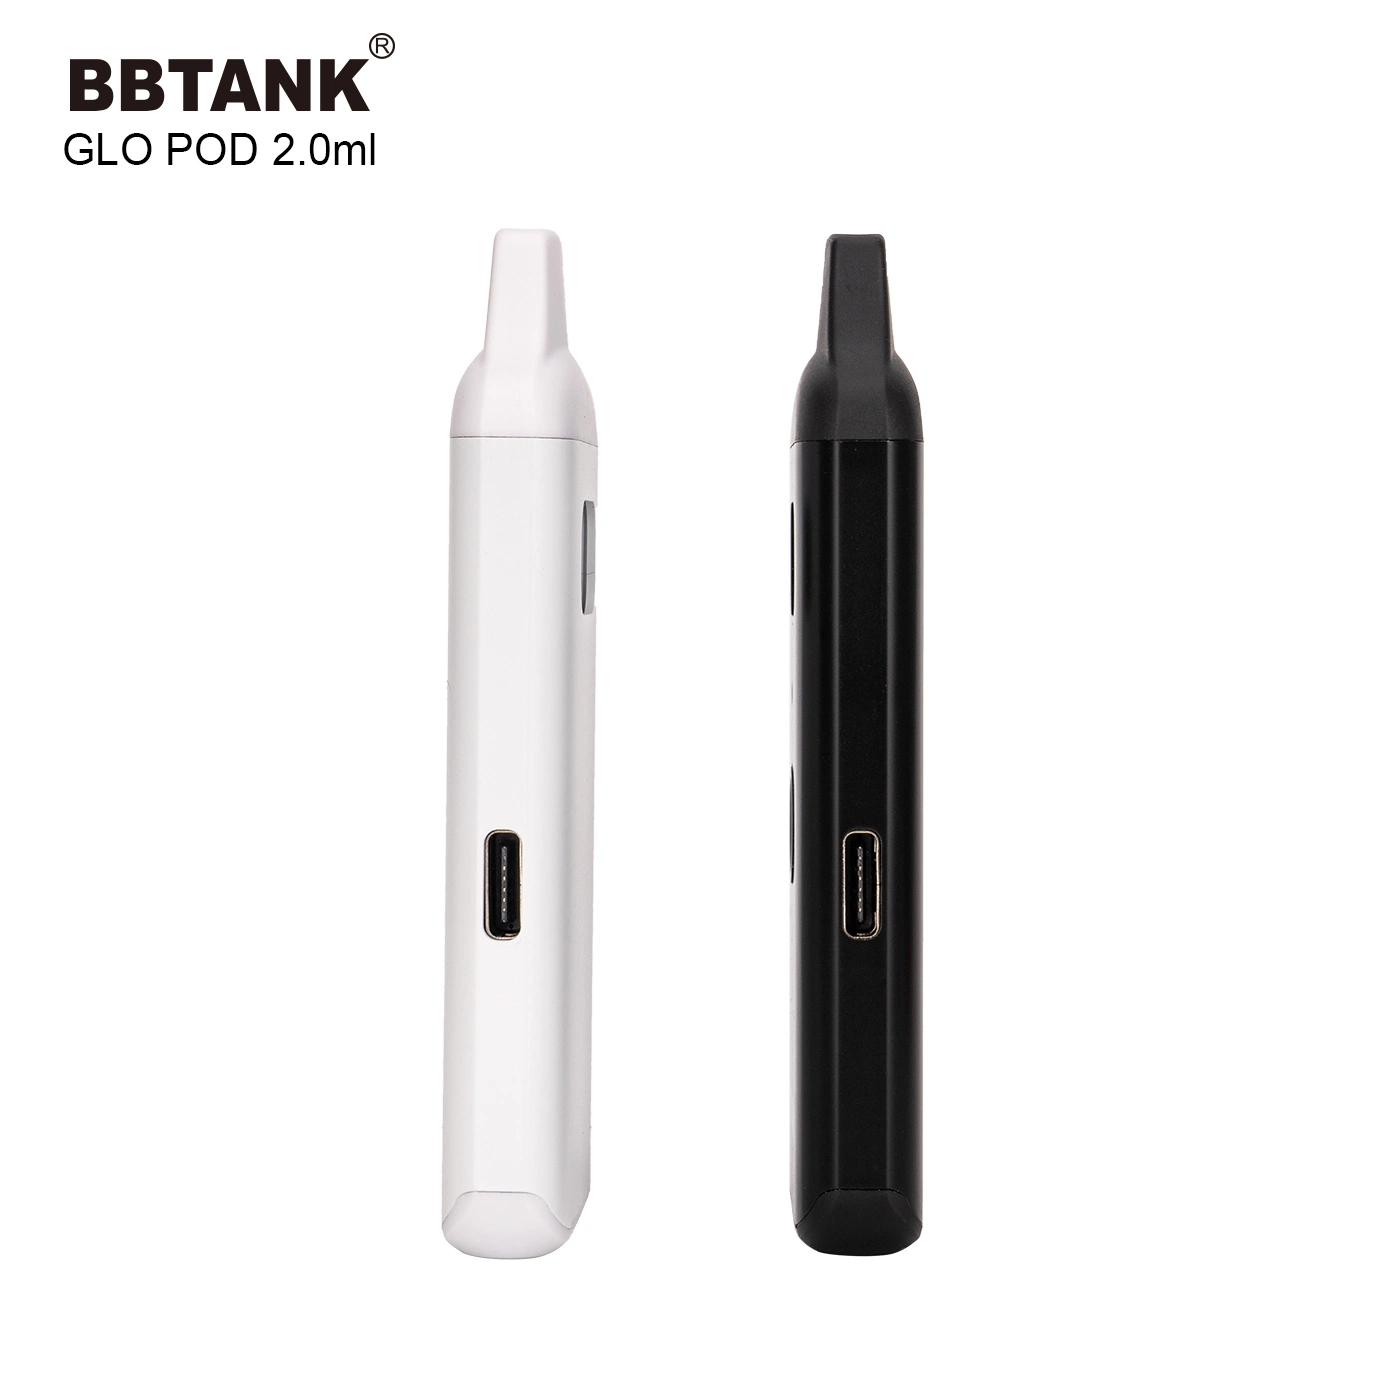 Postless Live Resin Disposable/Chargeable Vape Pen Bbtank New Product Designed Without Cotton Wrap Hhc Vape 2ml Disposable/Chargeable Vape Custom Wholesale/Supplier Thick Oil Pen